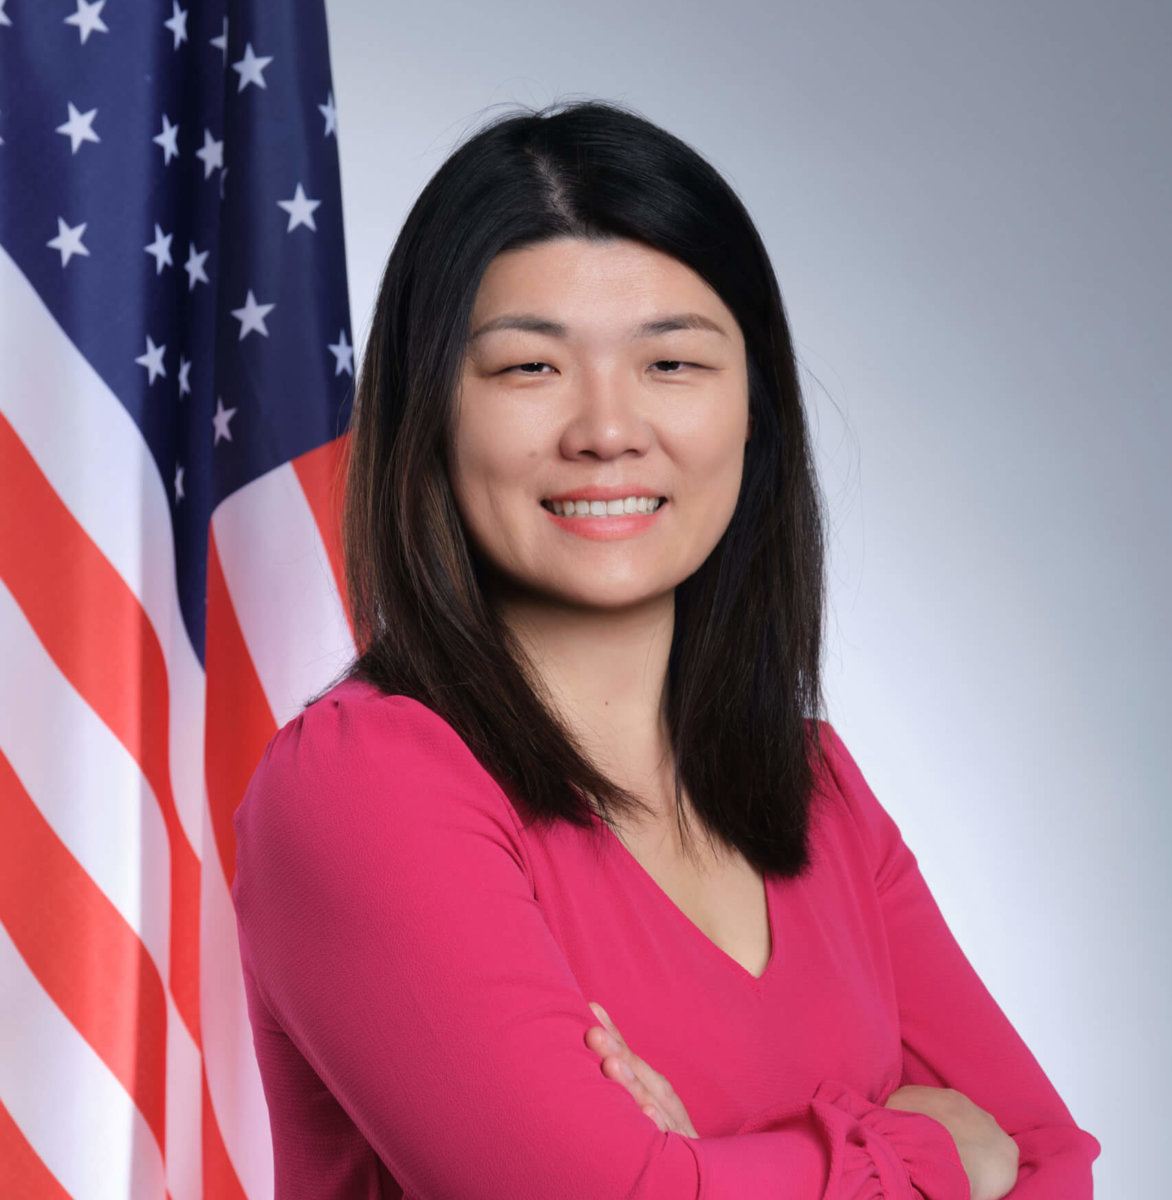 Susan Zhuang won the won the three-way race with 58.57 percent and 2,013 votes